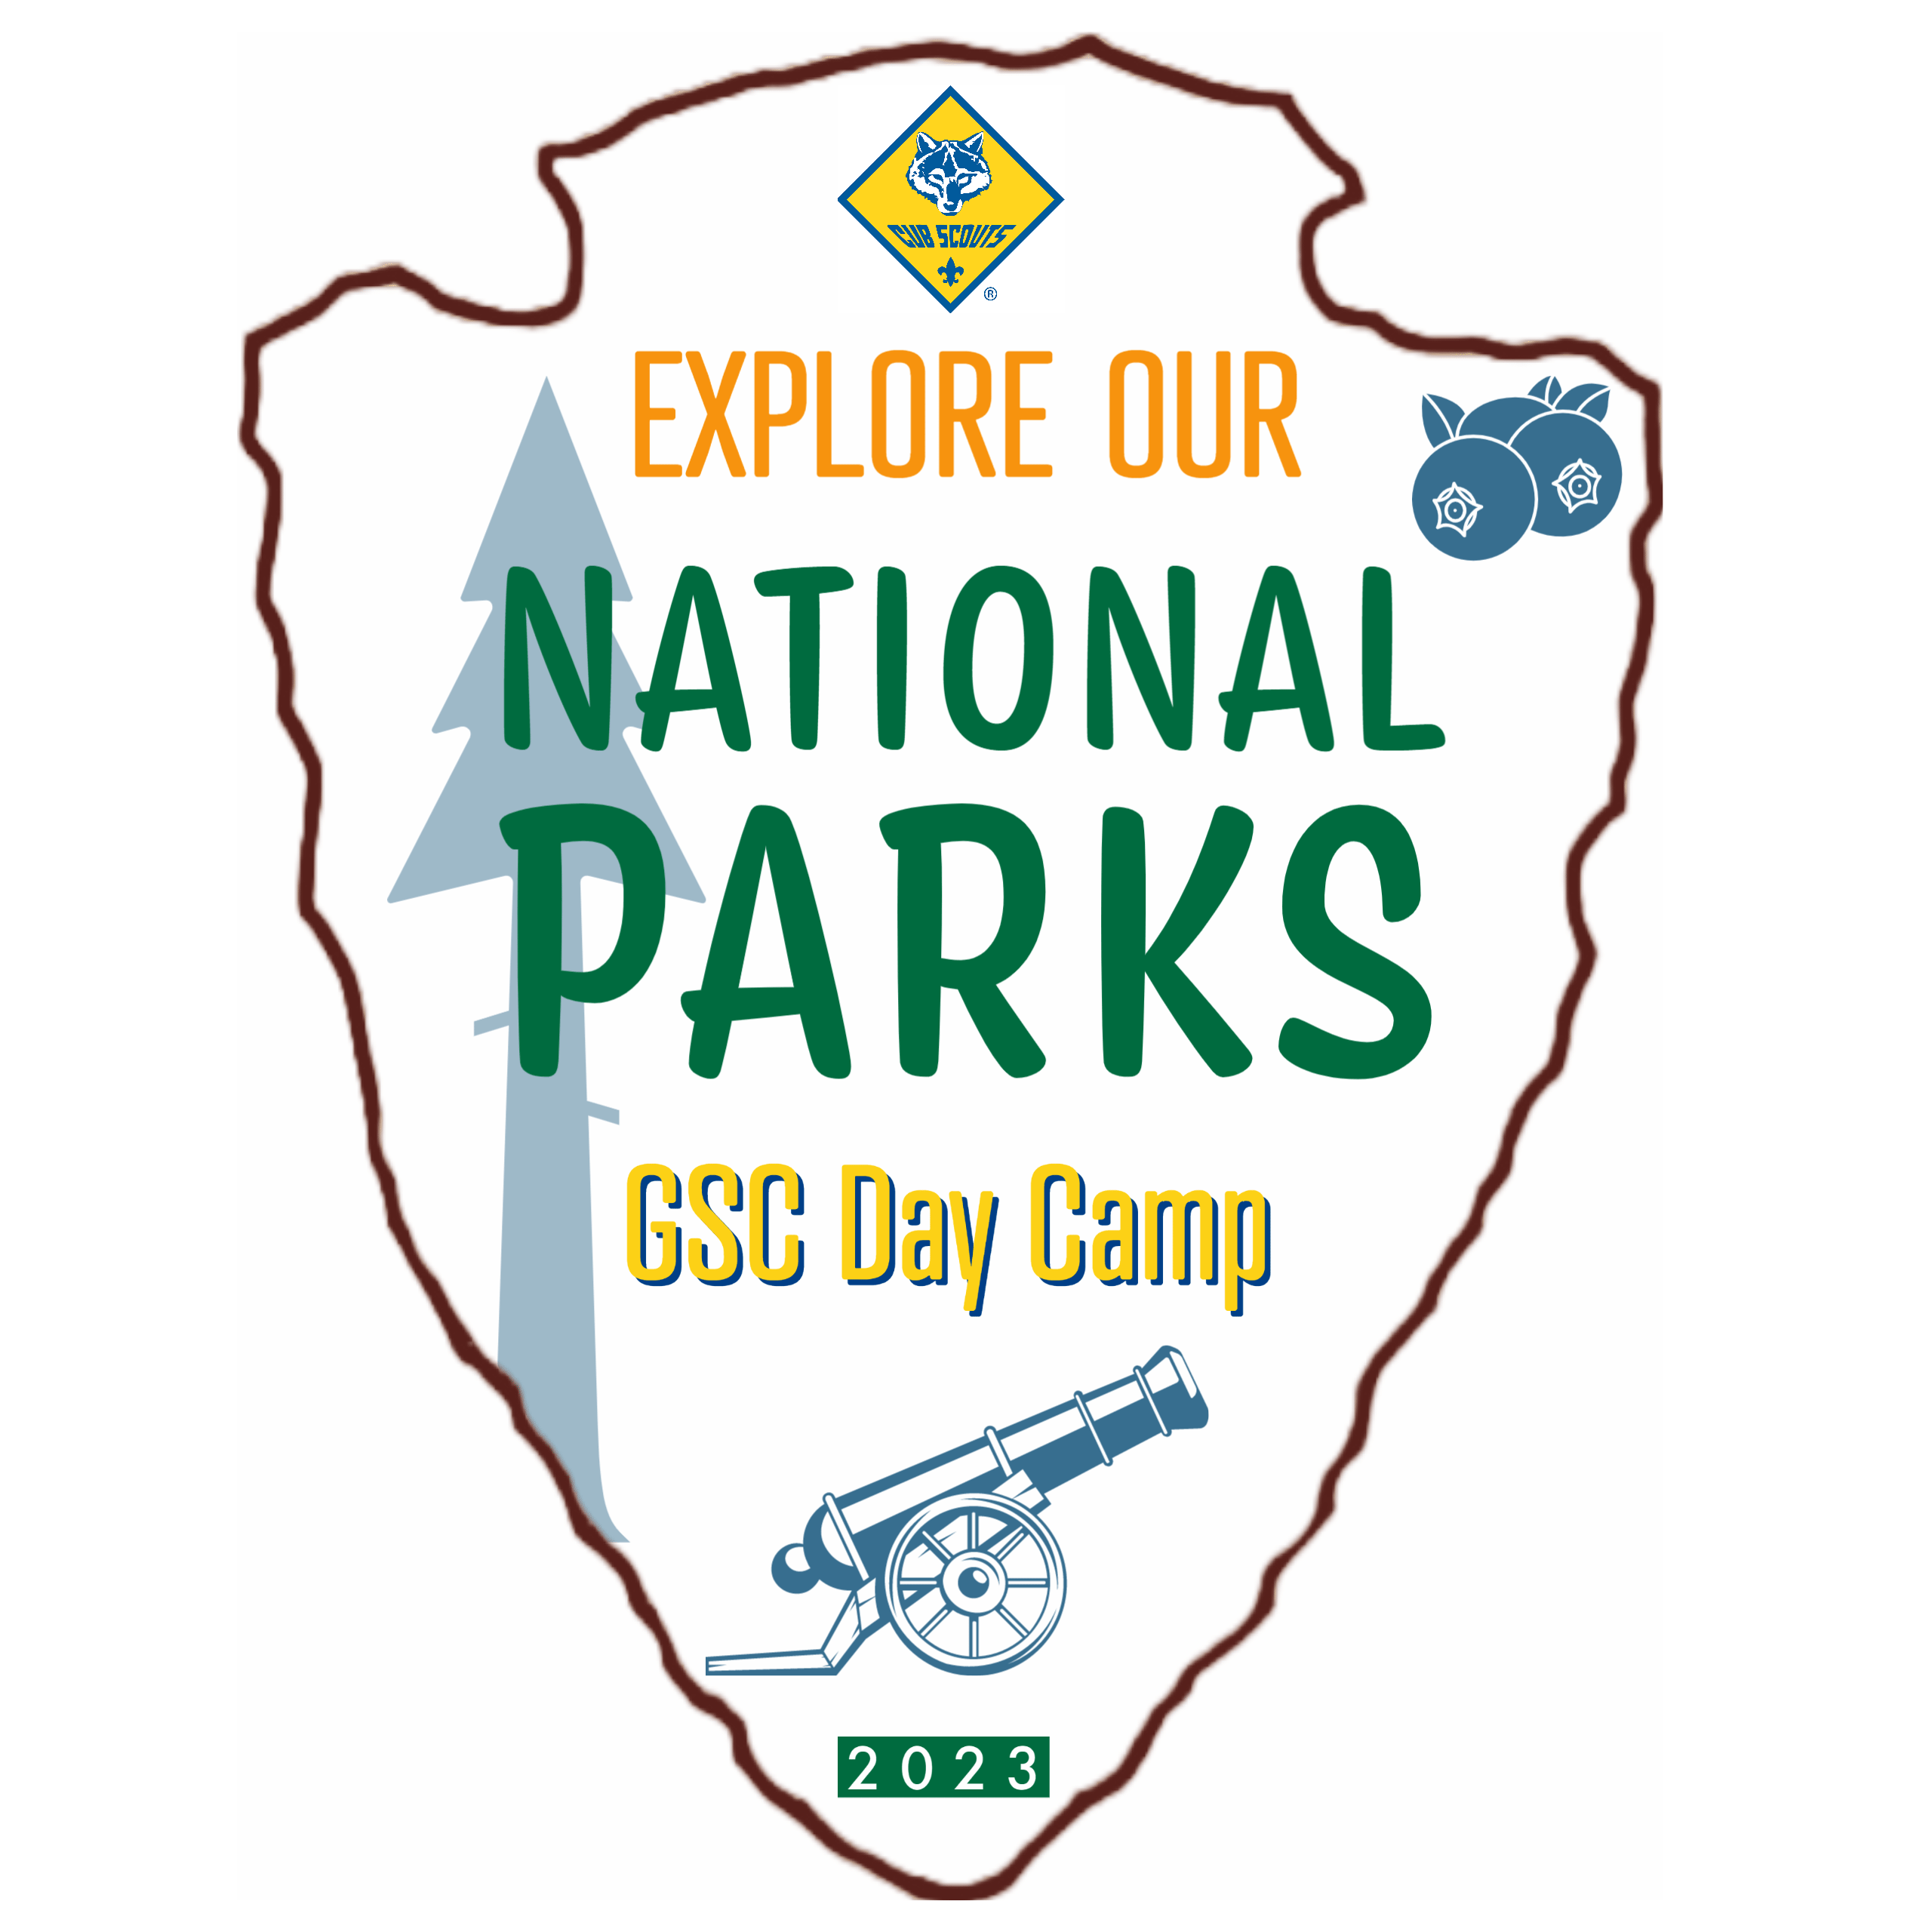 Logo for Garden State Council's 2023 Cub Day Camp is the arrow head shape of the National Parks logo with the words "Explore our National Parks" inside the border.